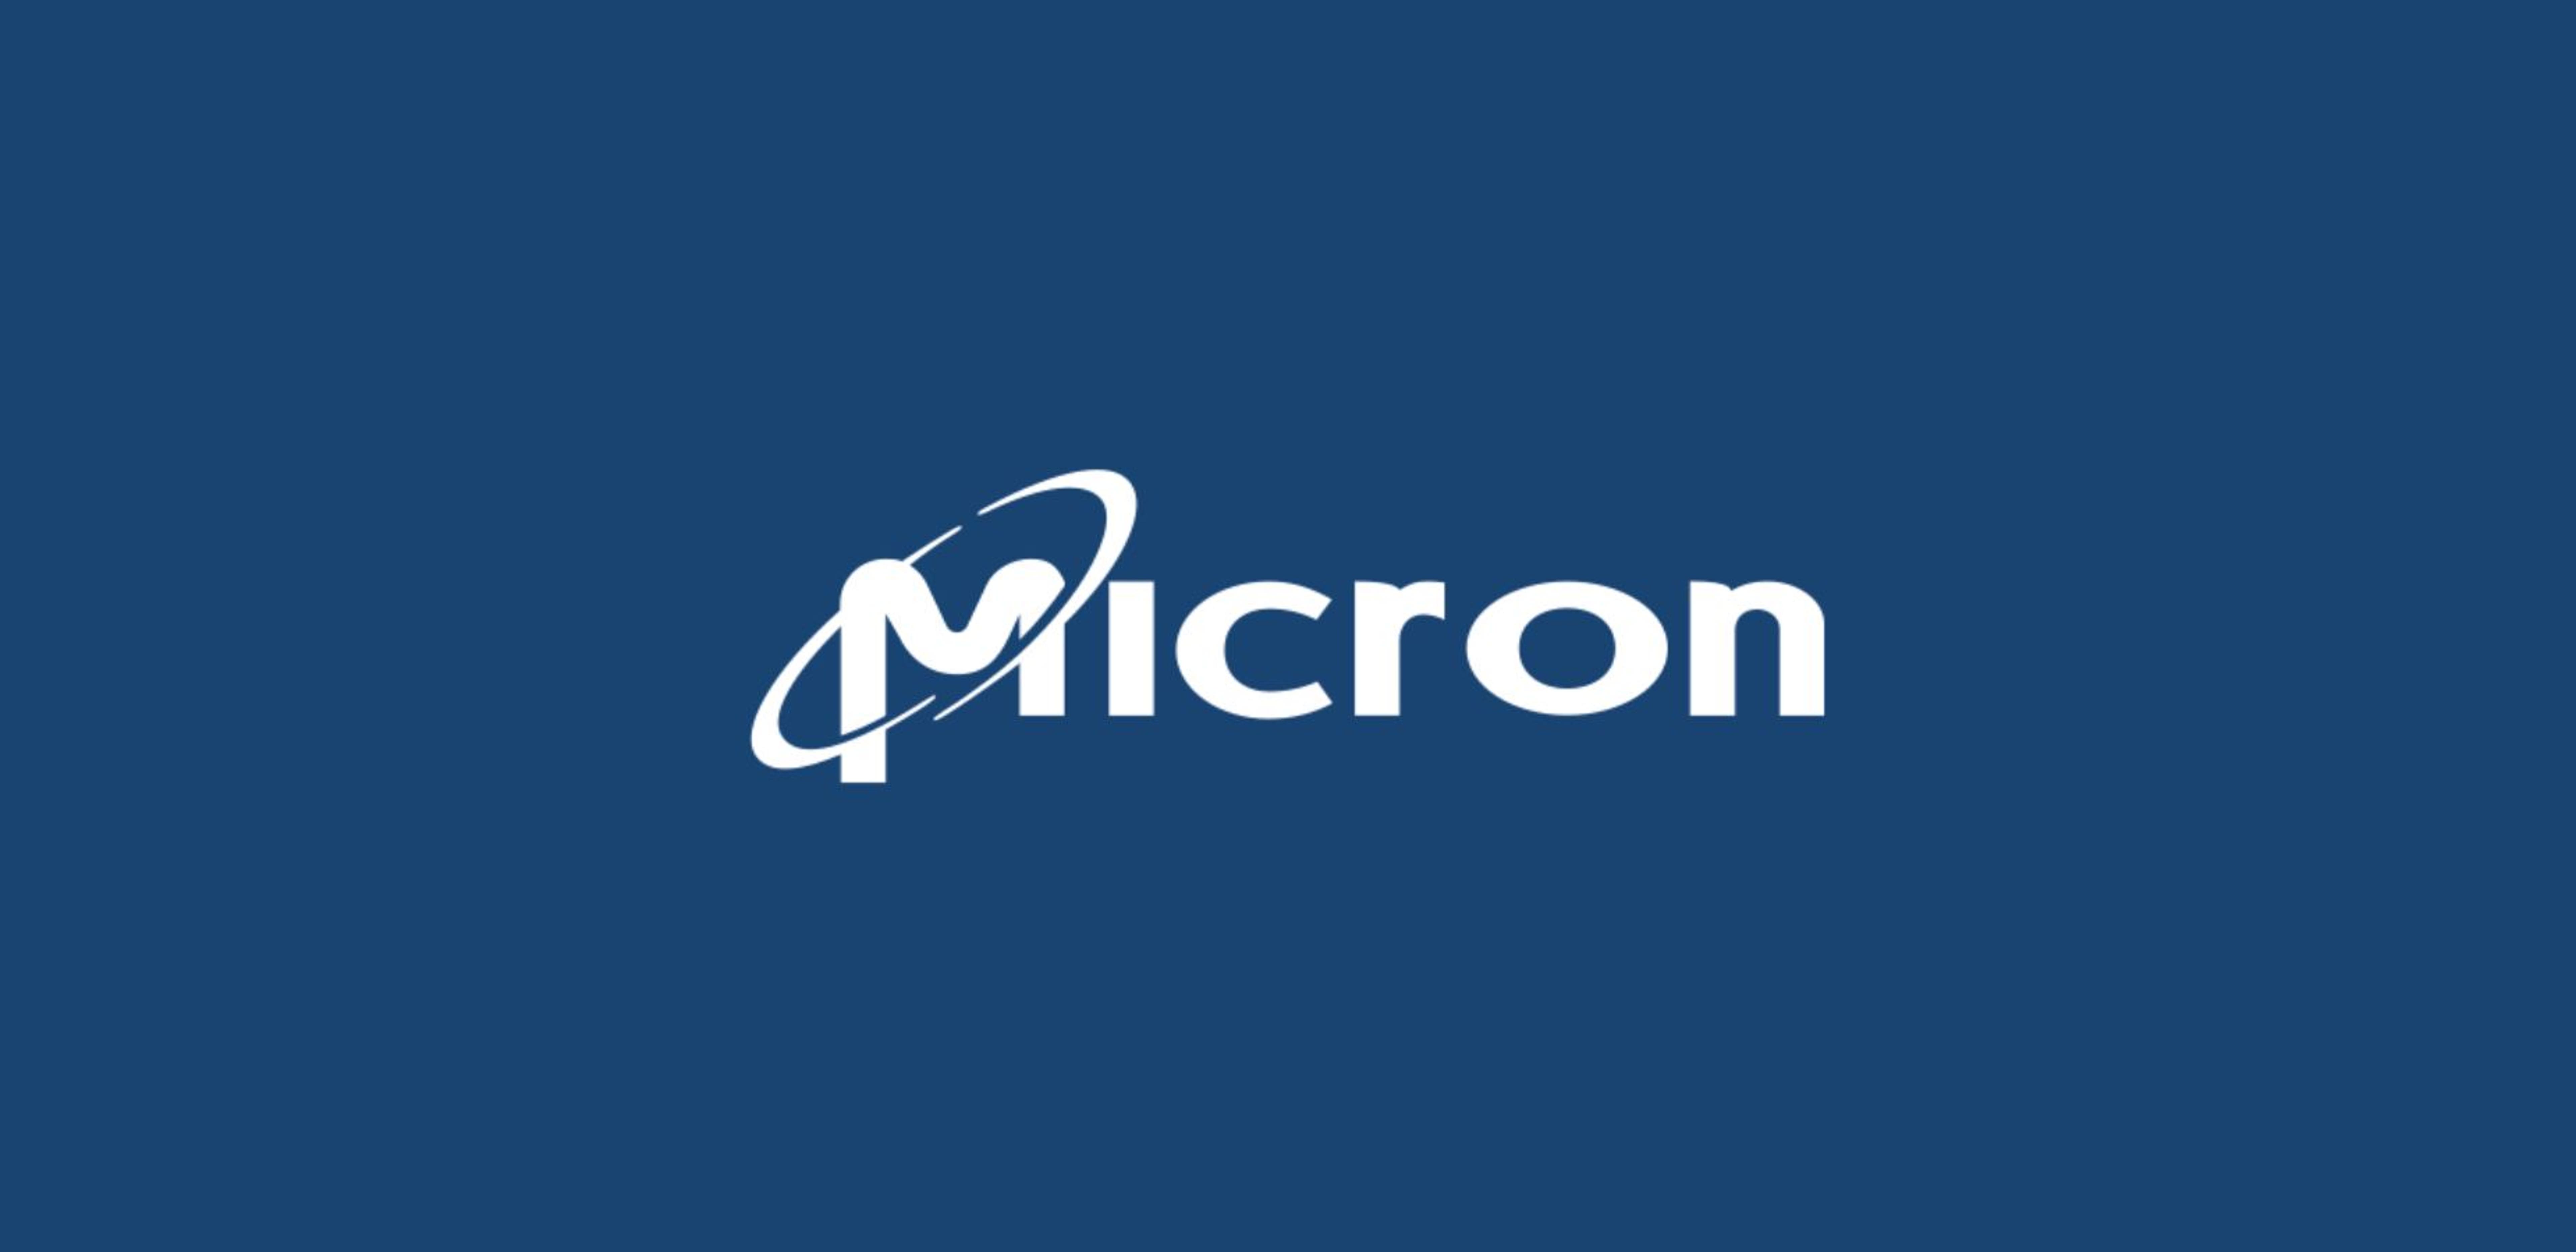 Micron Technology To Rally Around 21%? Here Are 10 Other Analyst Forecasts For Friday